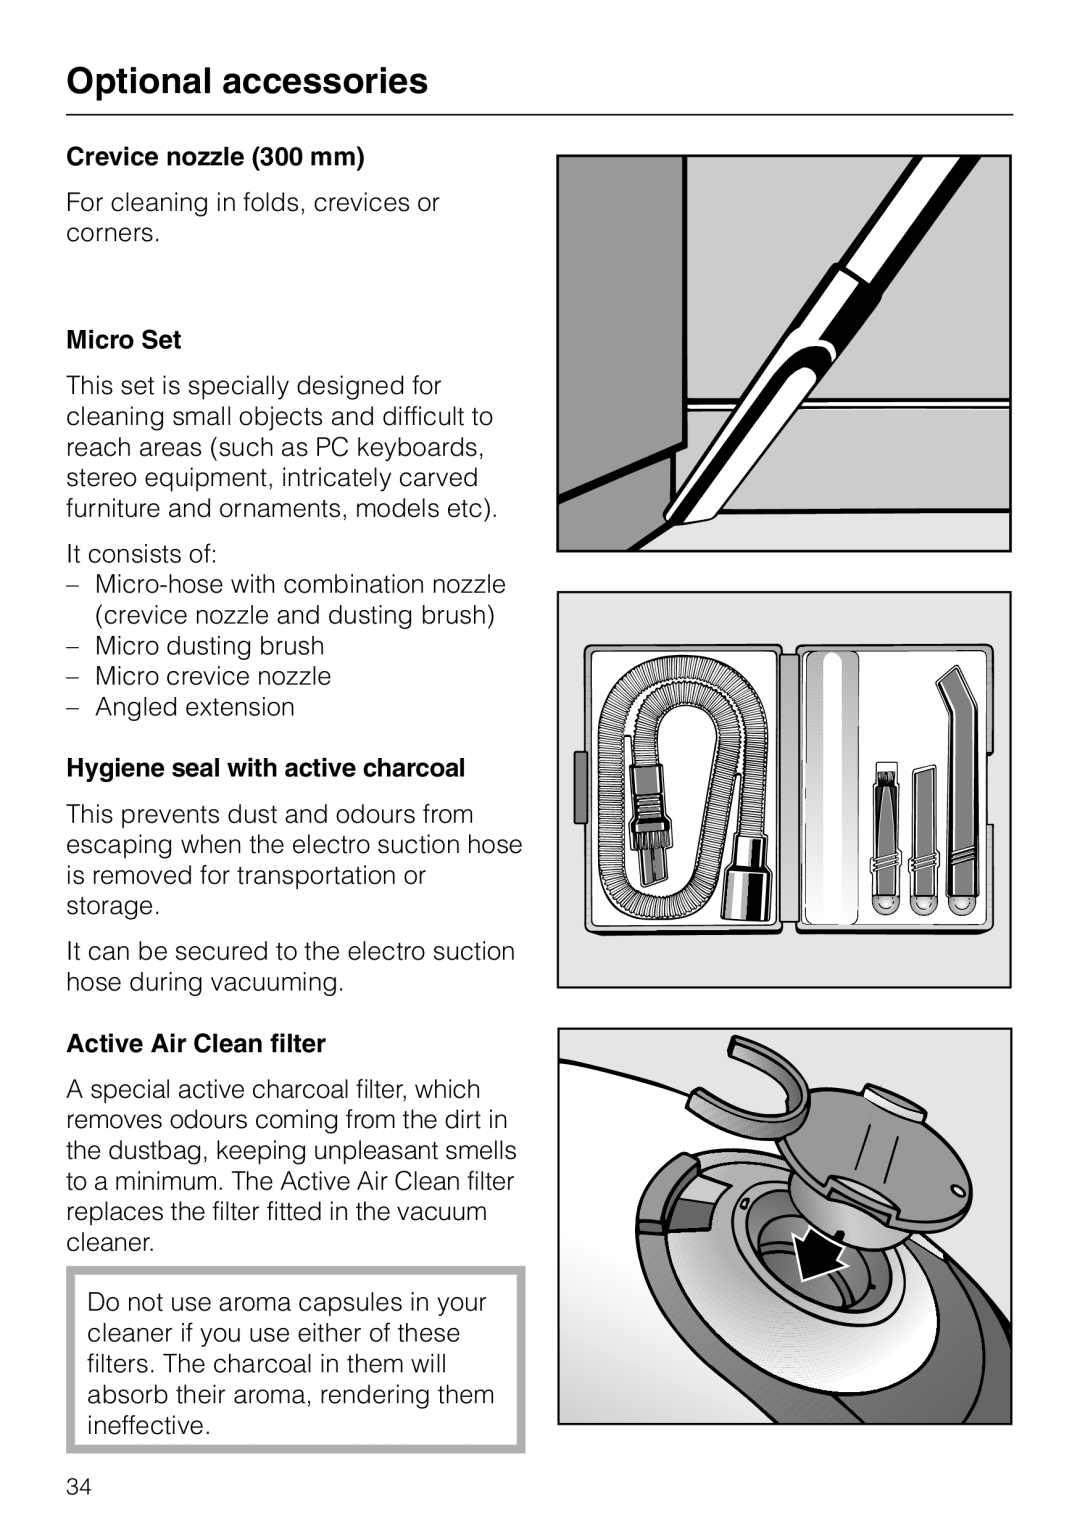 Miele S 5980 manual Optional accessories, Crevice nozzle 300 mm, Micro Set, Hygiene seal with active charcoal 